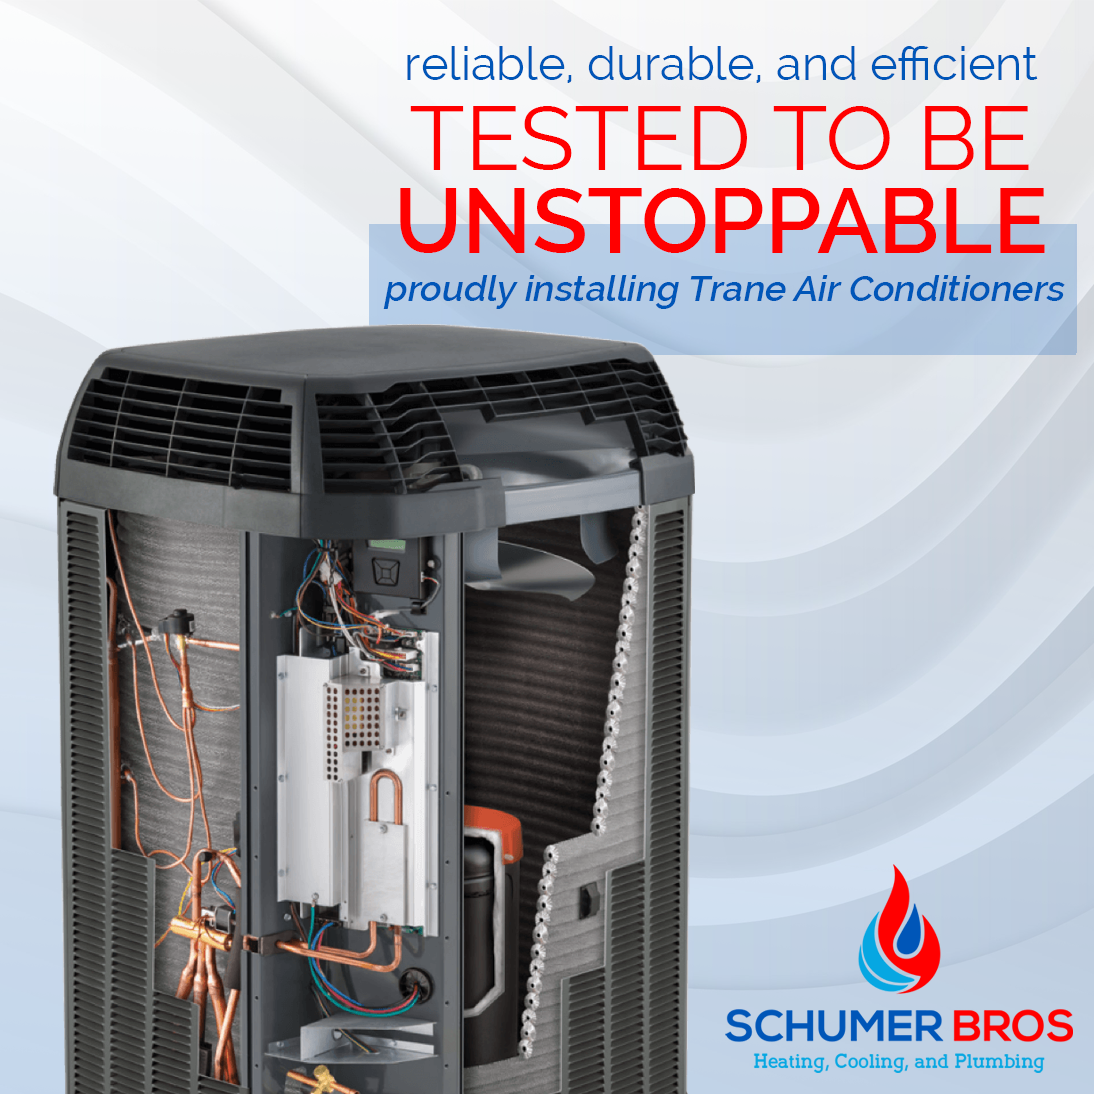 Bring home the most dependable and tested brand in heating and cooling!